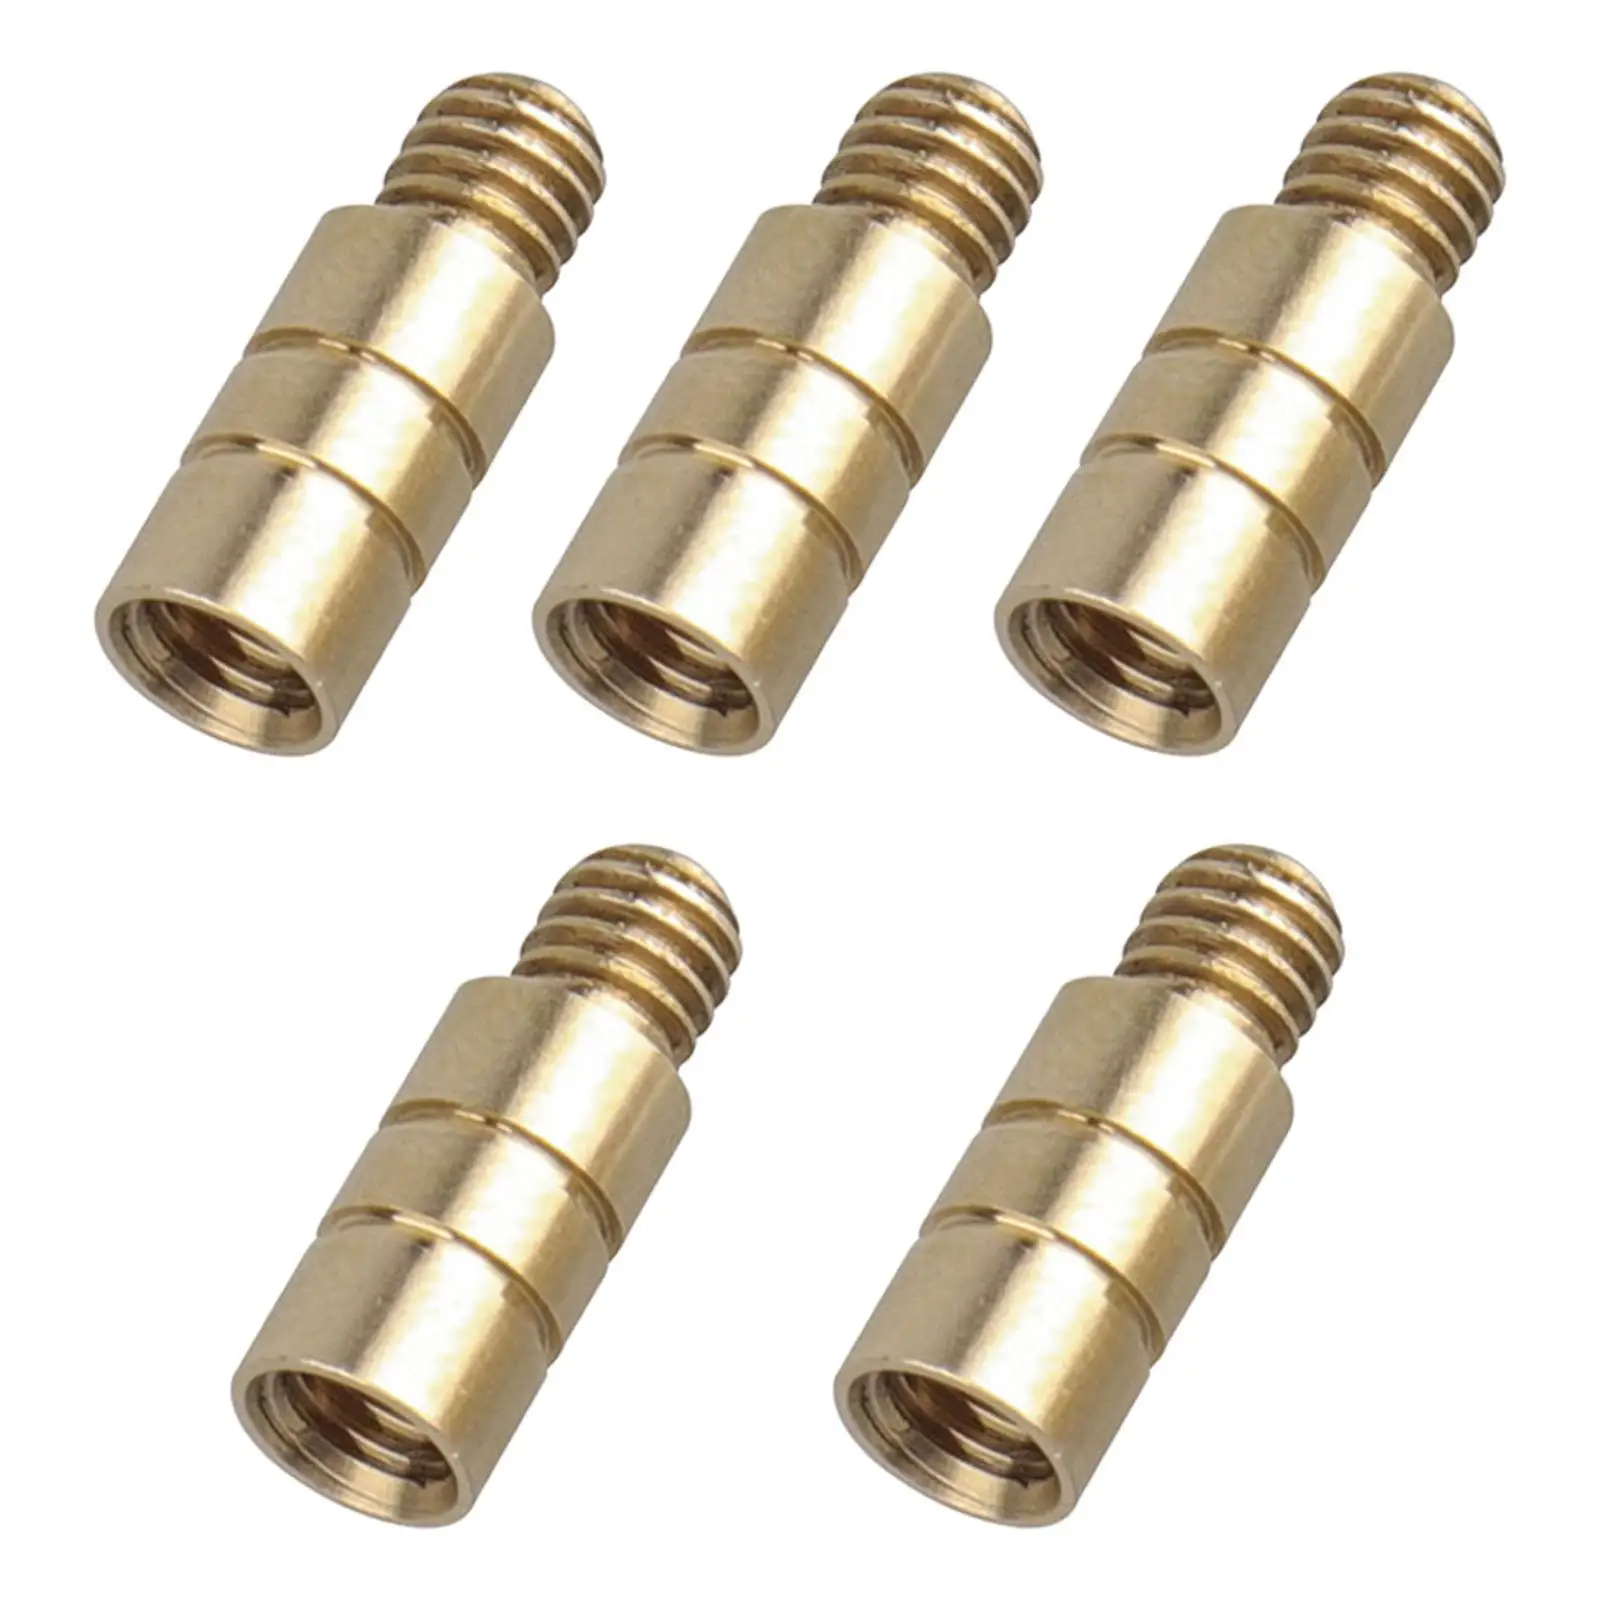 5pcs Brass Darts Counterweight 2g, 2BA Darts Weight Tool Accessories For Soft and Steel Darts